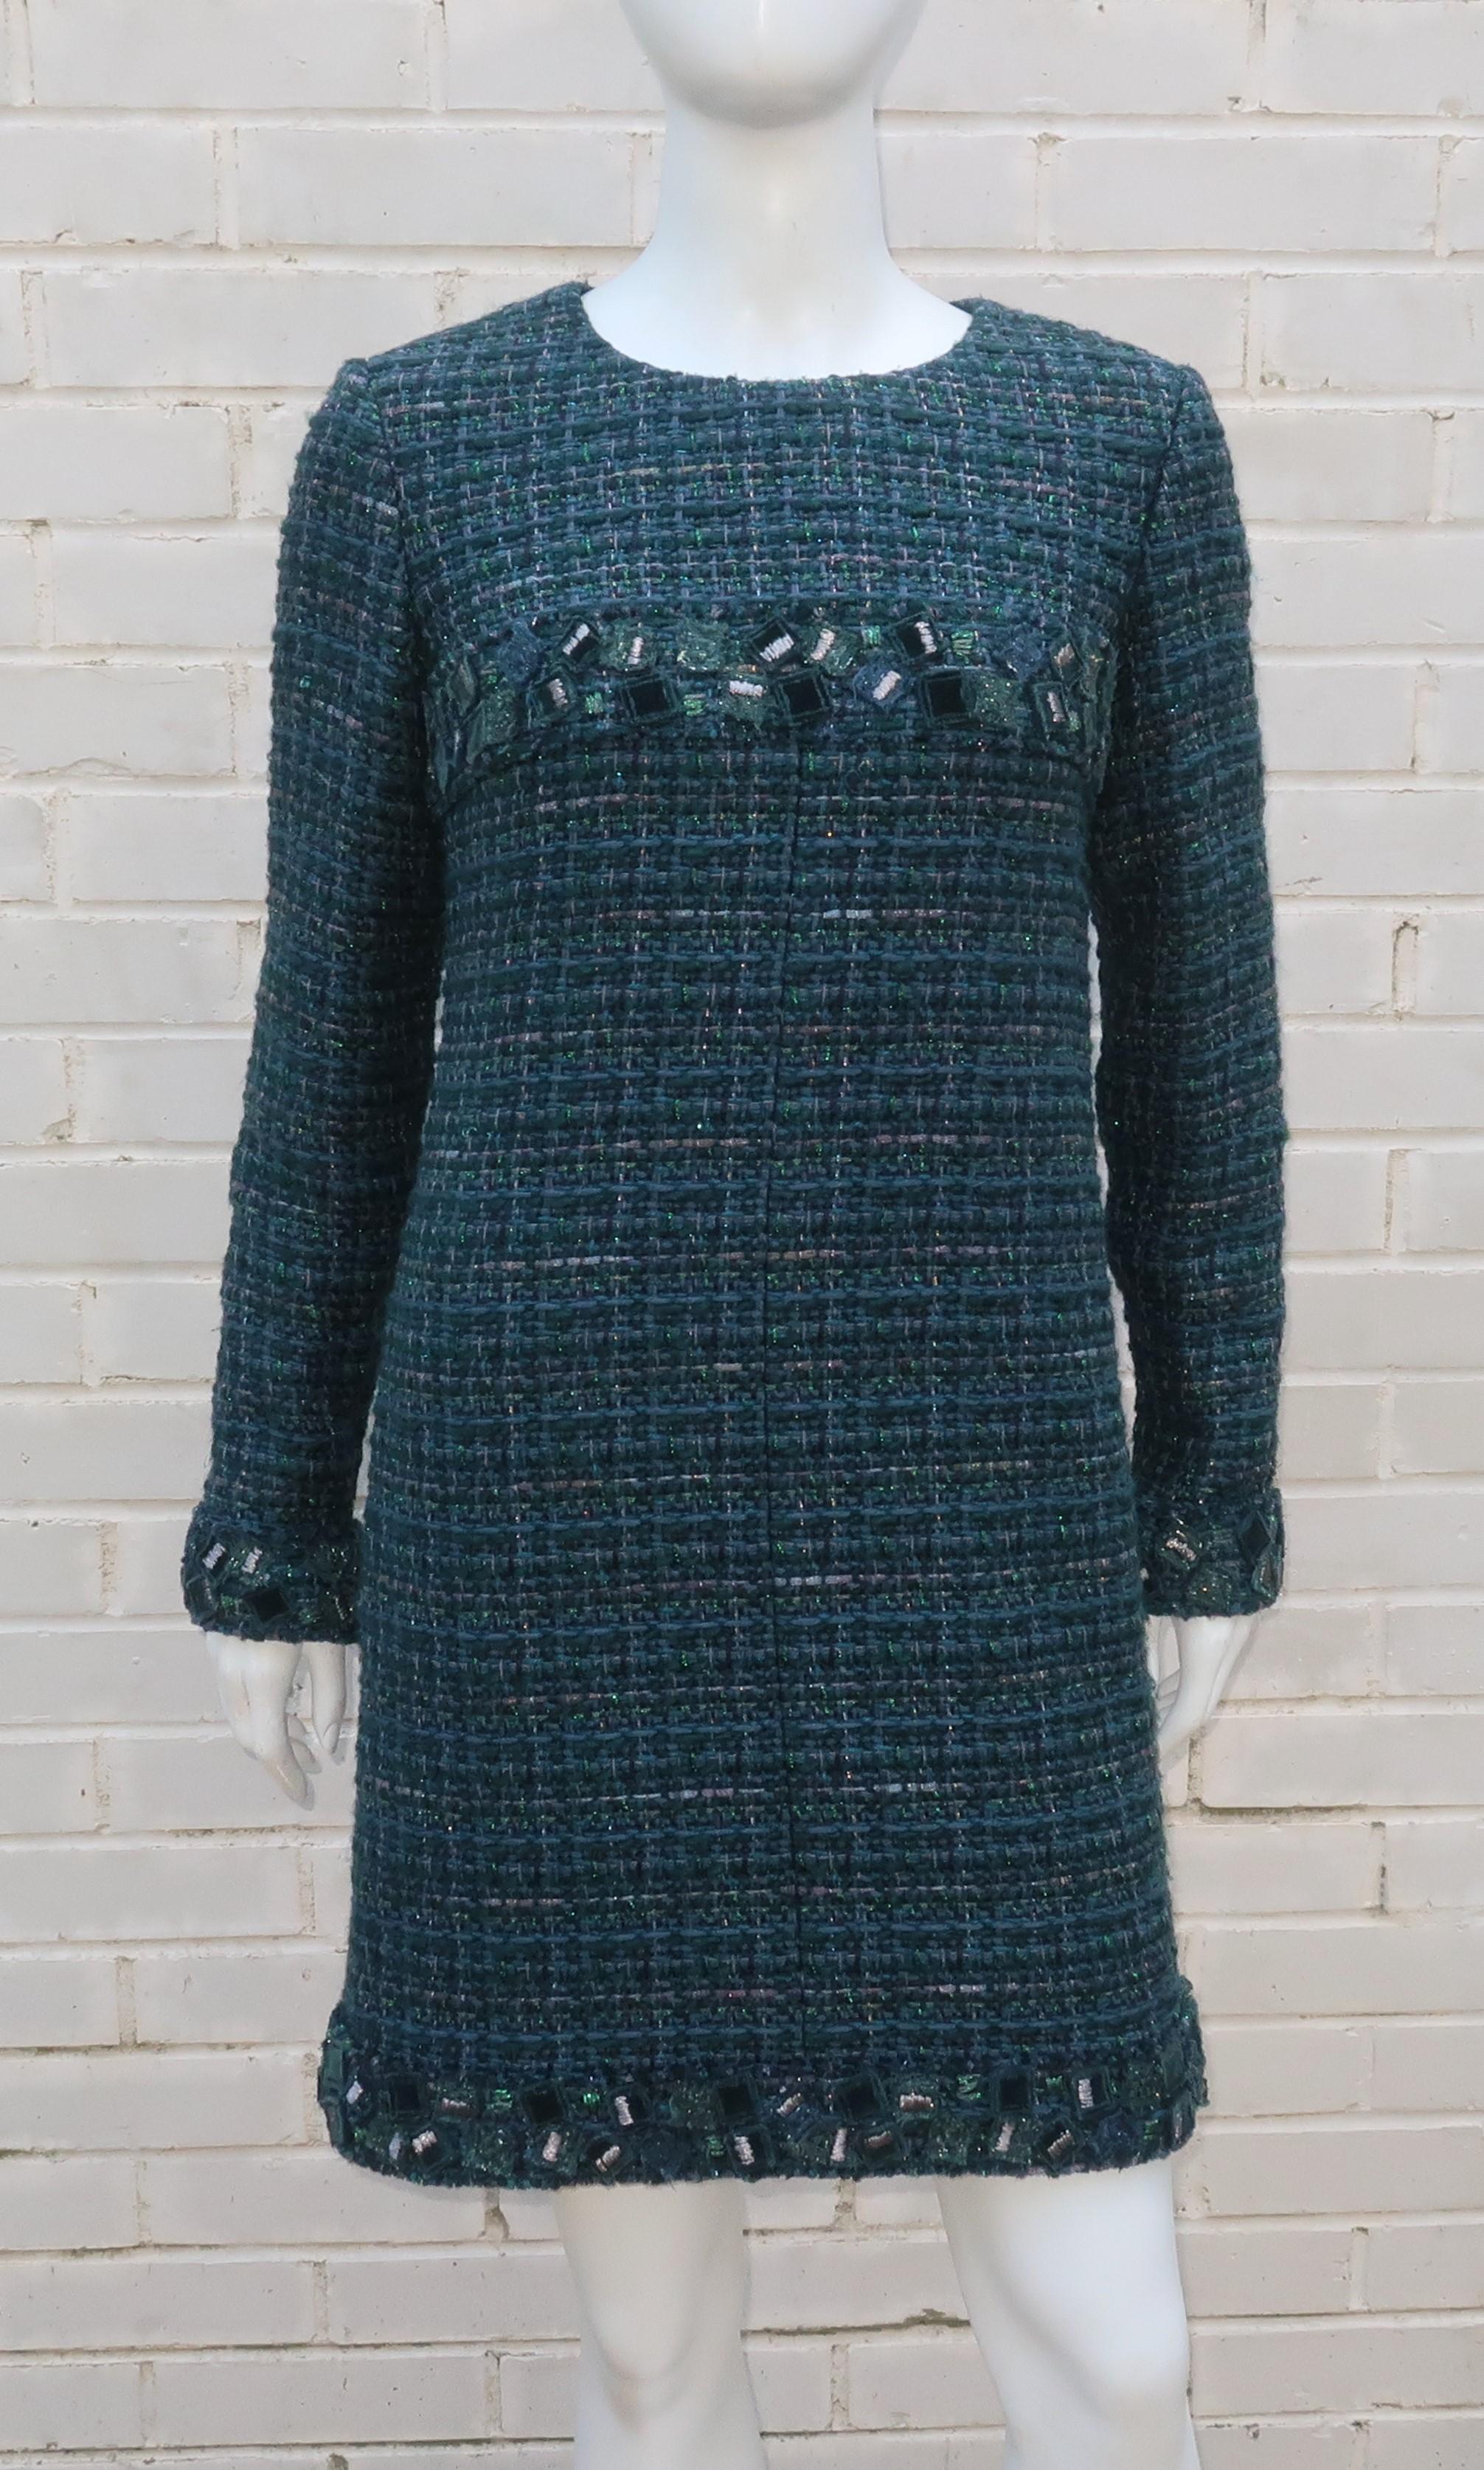 Fall/Winter 2012 Chanel long sleeved shift dress in a beautiful teal green wool tweed fabric accented by silver metallic threading.  The dress zips at the back and cuffs with an ornate trim incorporating a mosaic of velvet and tweed squares